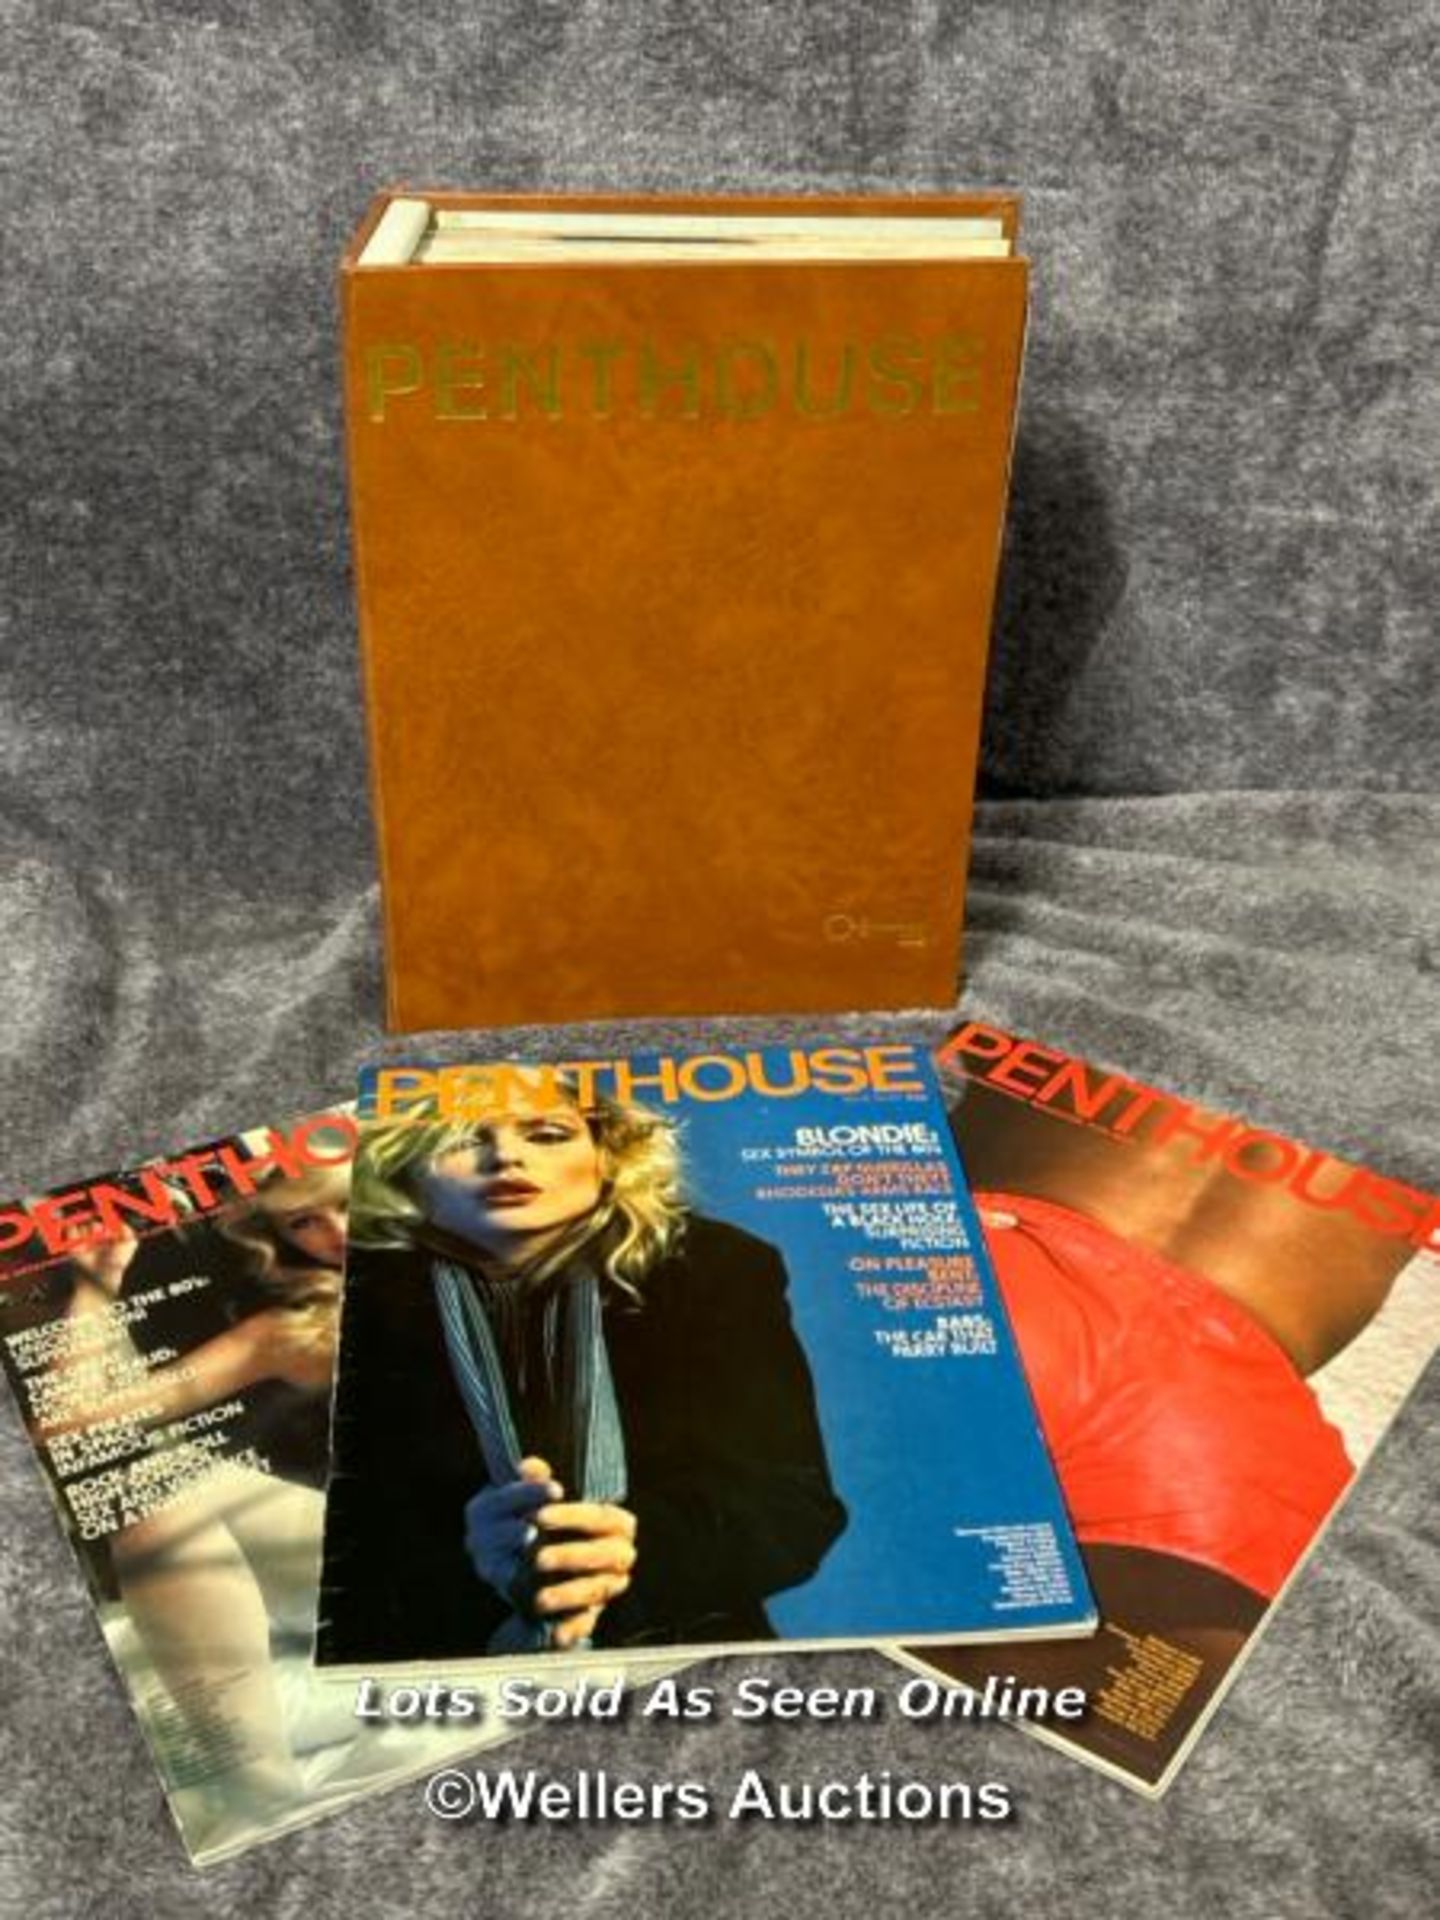 Vintage 1980 Penthouse magazines vol.15 issues 1-12 in binder with three issues from vol.14 / AN32